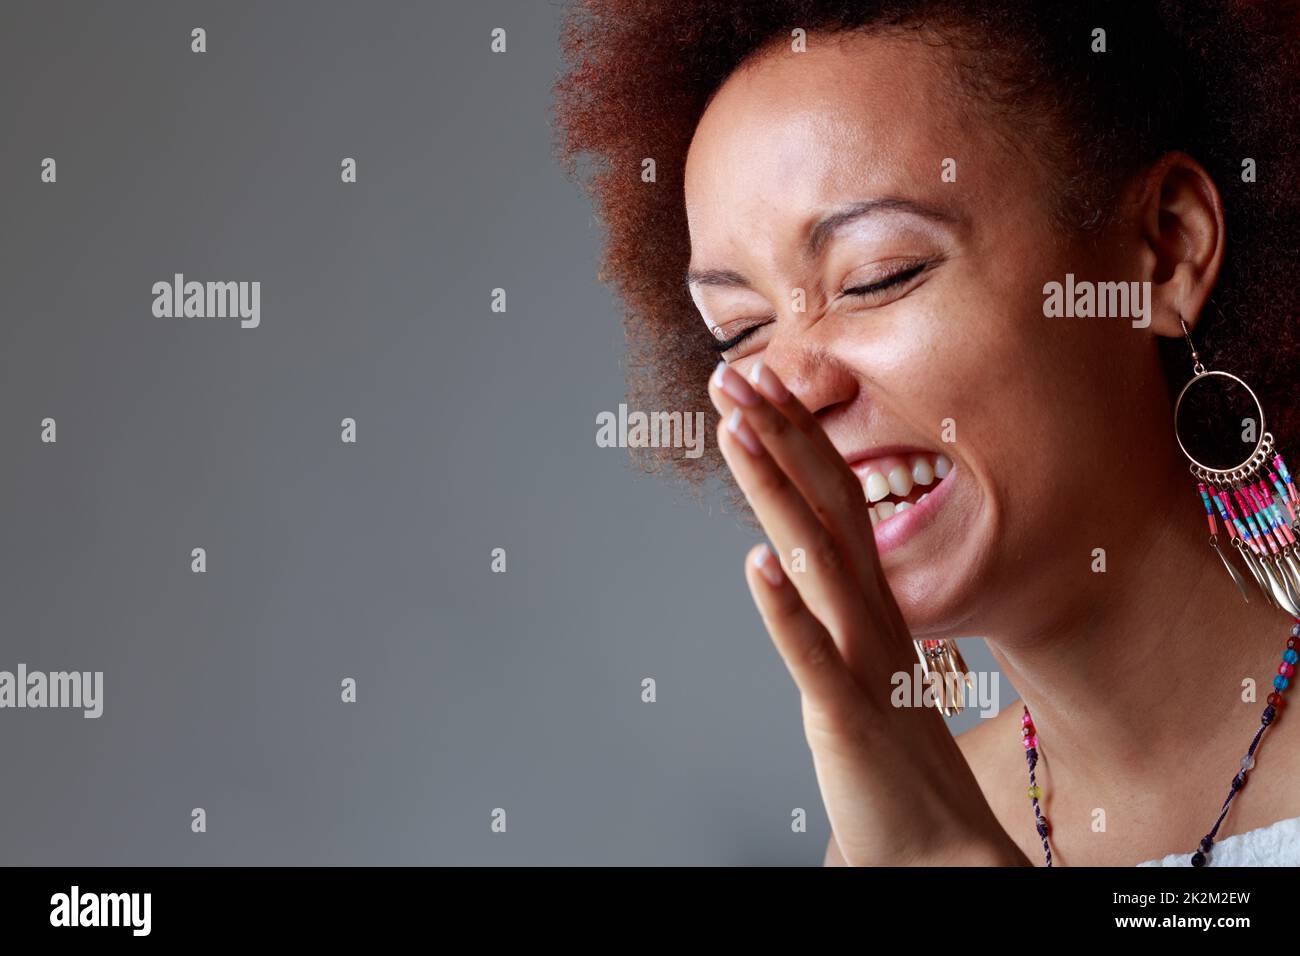 Candid portrait of a laughing young Black woman Stock Photo